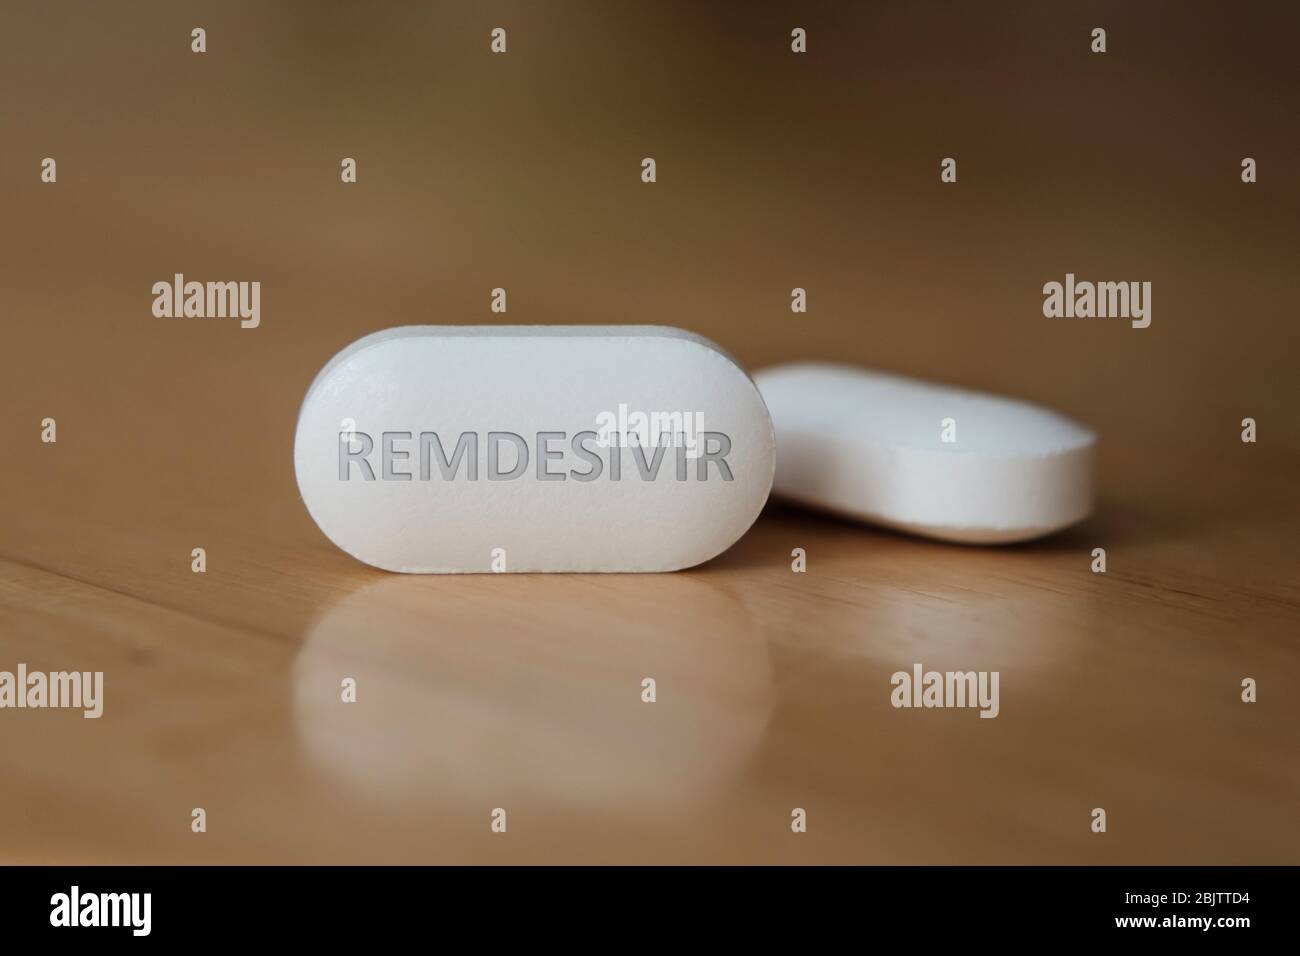 Remdesivir pill on the table. Concept photo. Illustrative for potential COVID-19 treatment drug. Selective focus, shallow depth of field. Stock Photo